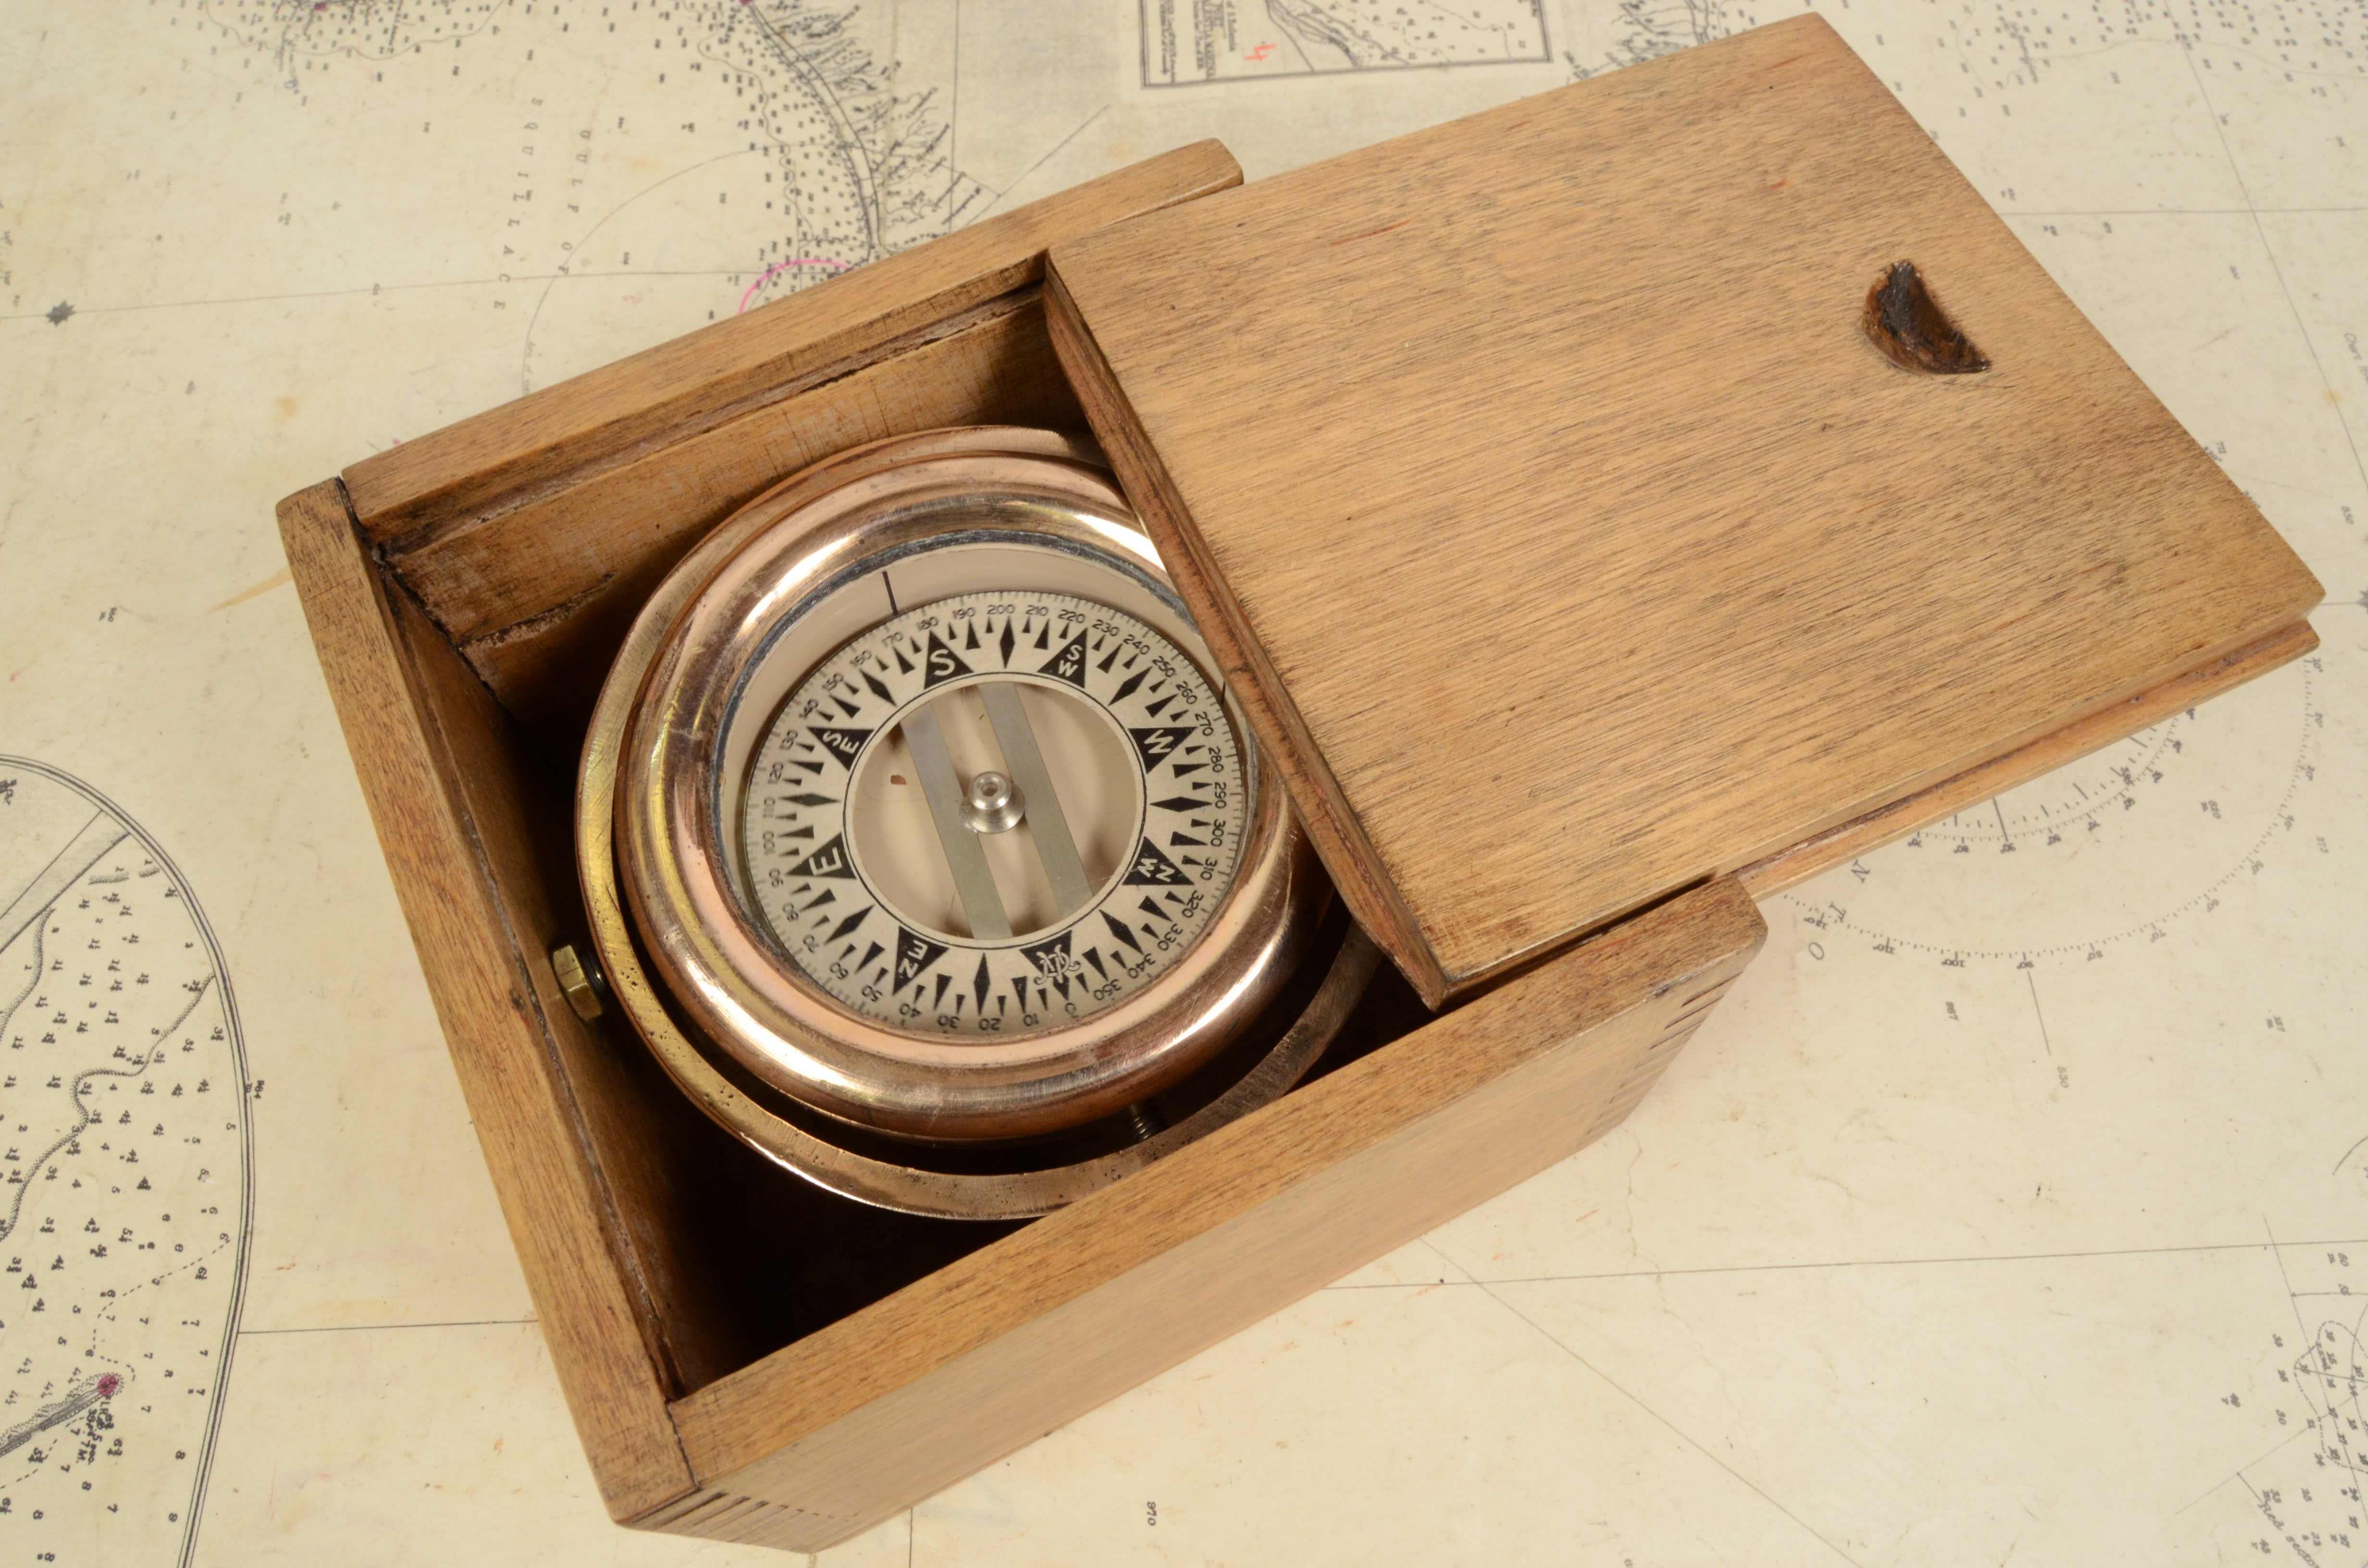 Nautical compass on cardan joint and original wooden box, English manufacture from the early 1900s. Rose on paper at eight twenty. The compass consists of a cylindrical container in brass and bronze, called mortar, on the bottom of which a hard